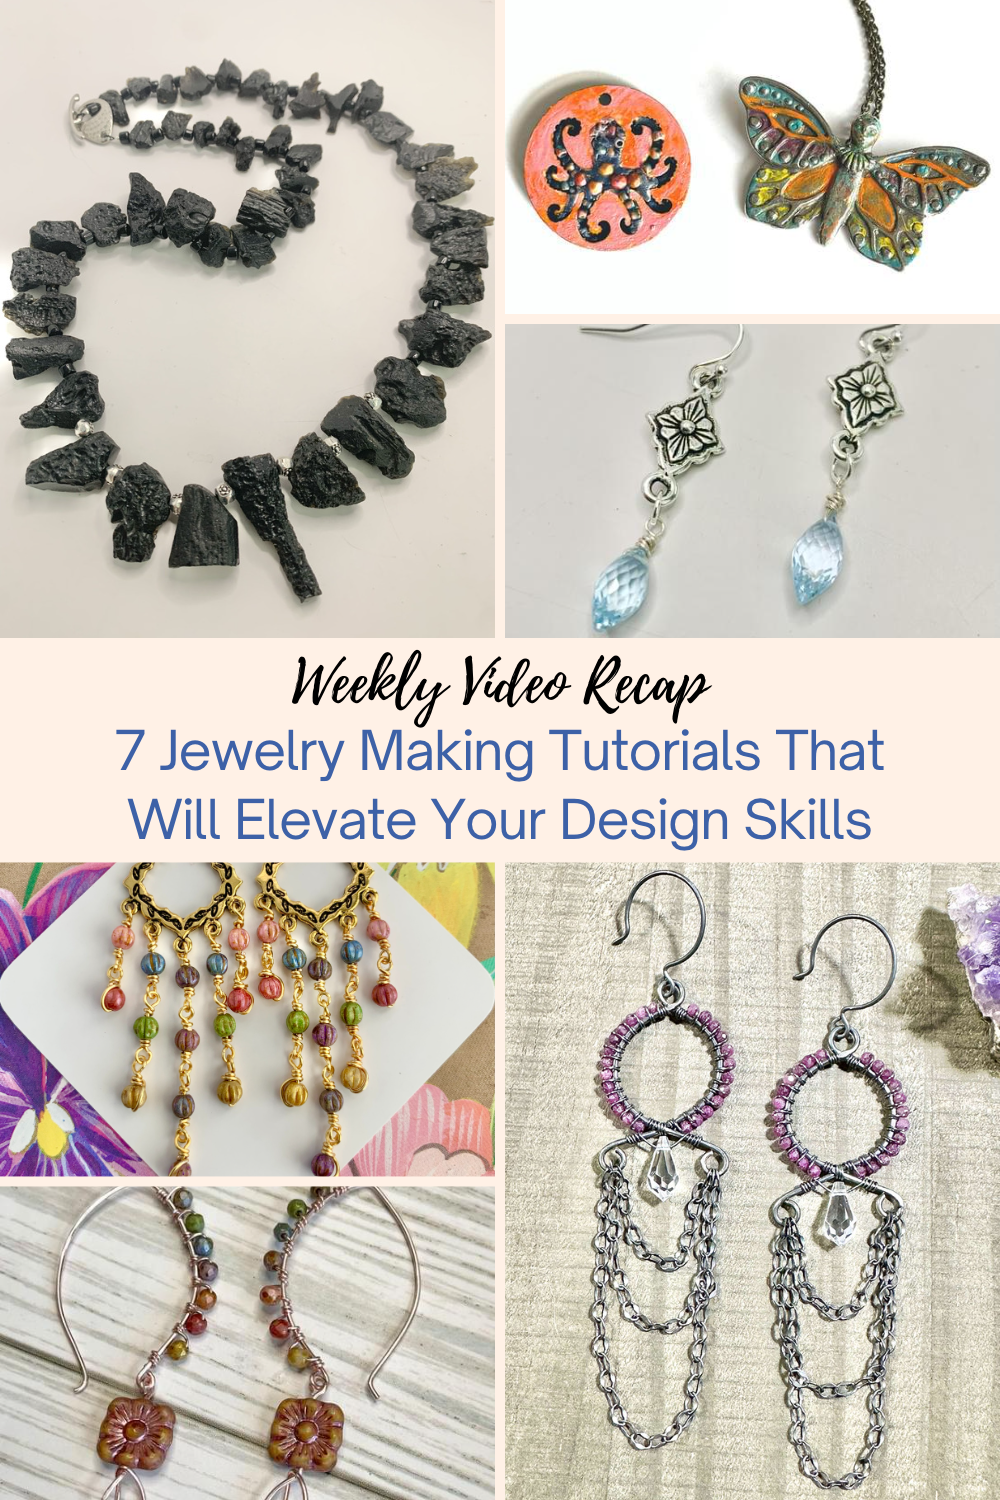 7 Jewelry Making Tutorials That Will Elevate Your Design Skills Collage